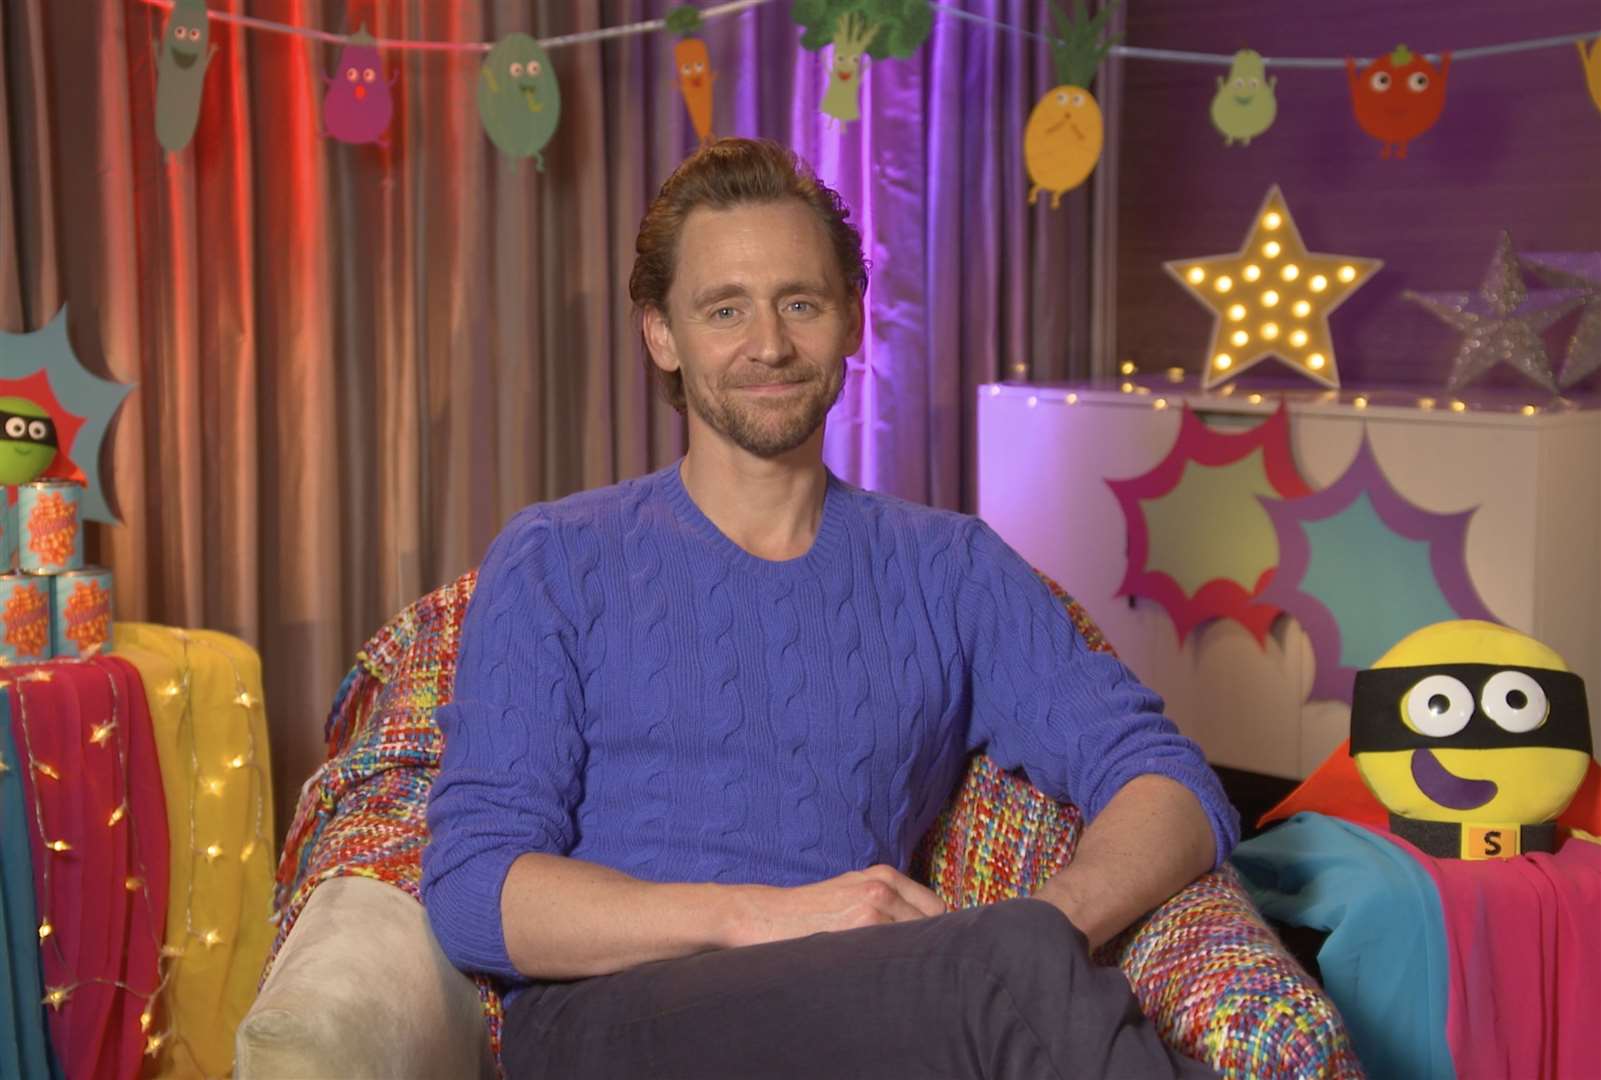 Snuggle down for a CBeebies Bedtime Story with Tom Hiddleston